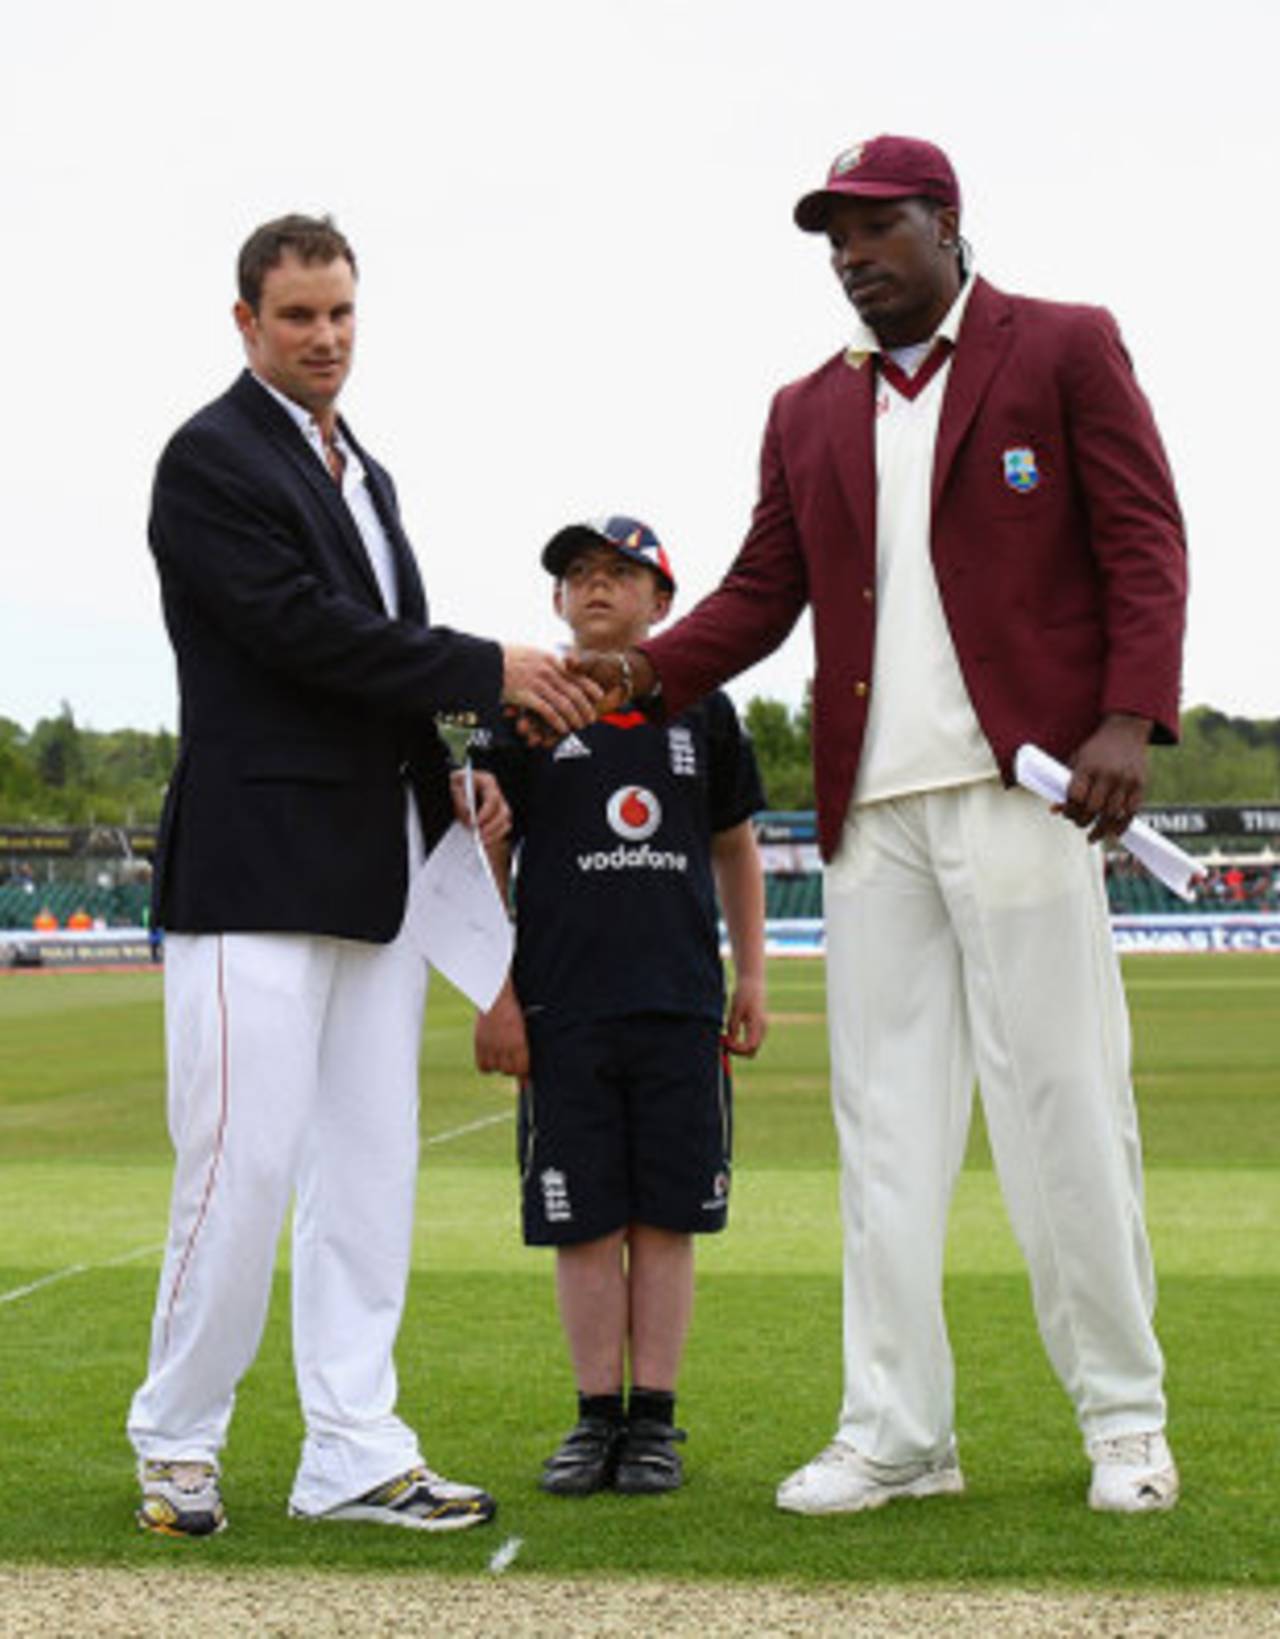 Andrew Strauss and Chris Gayle shake hands at the toss on the first morning at Chester-le-Street, England v West Indies, 2nd Test, Chester-le-Street, May 14, 2009